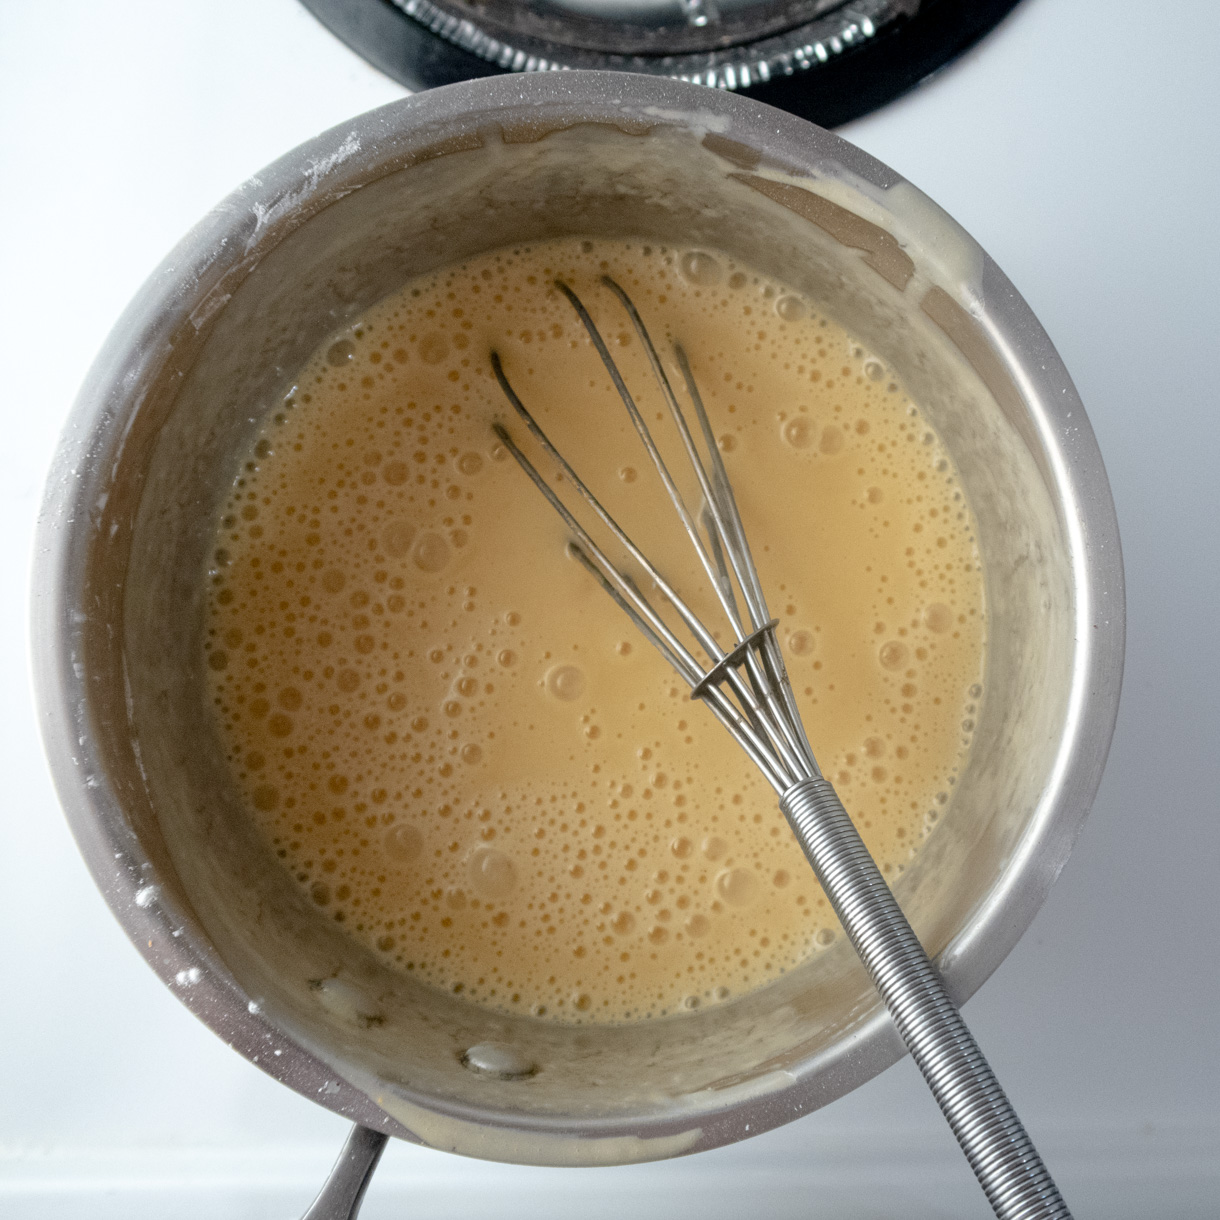 The passionfruit curd ingredients mixed in a saucepan before the cooking process.